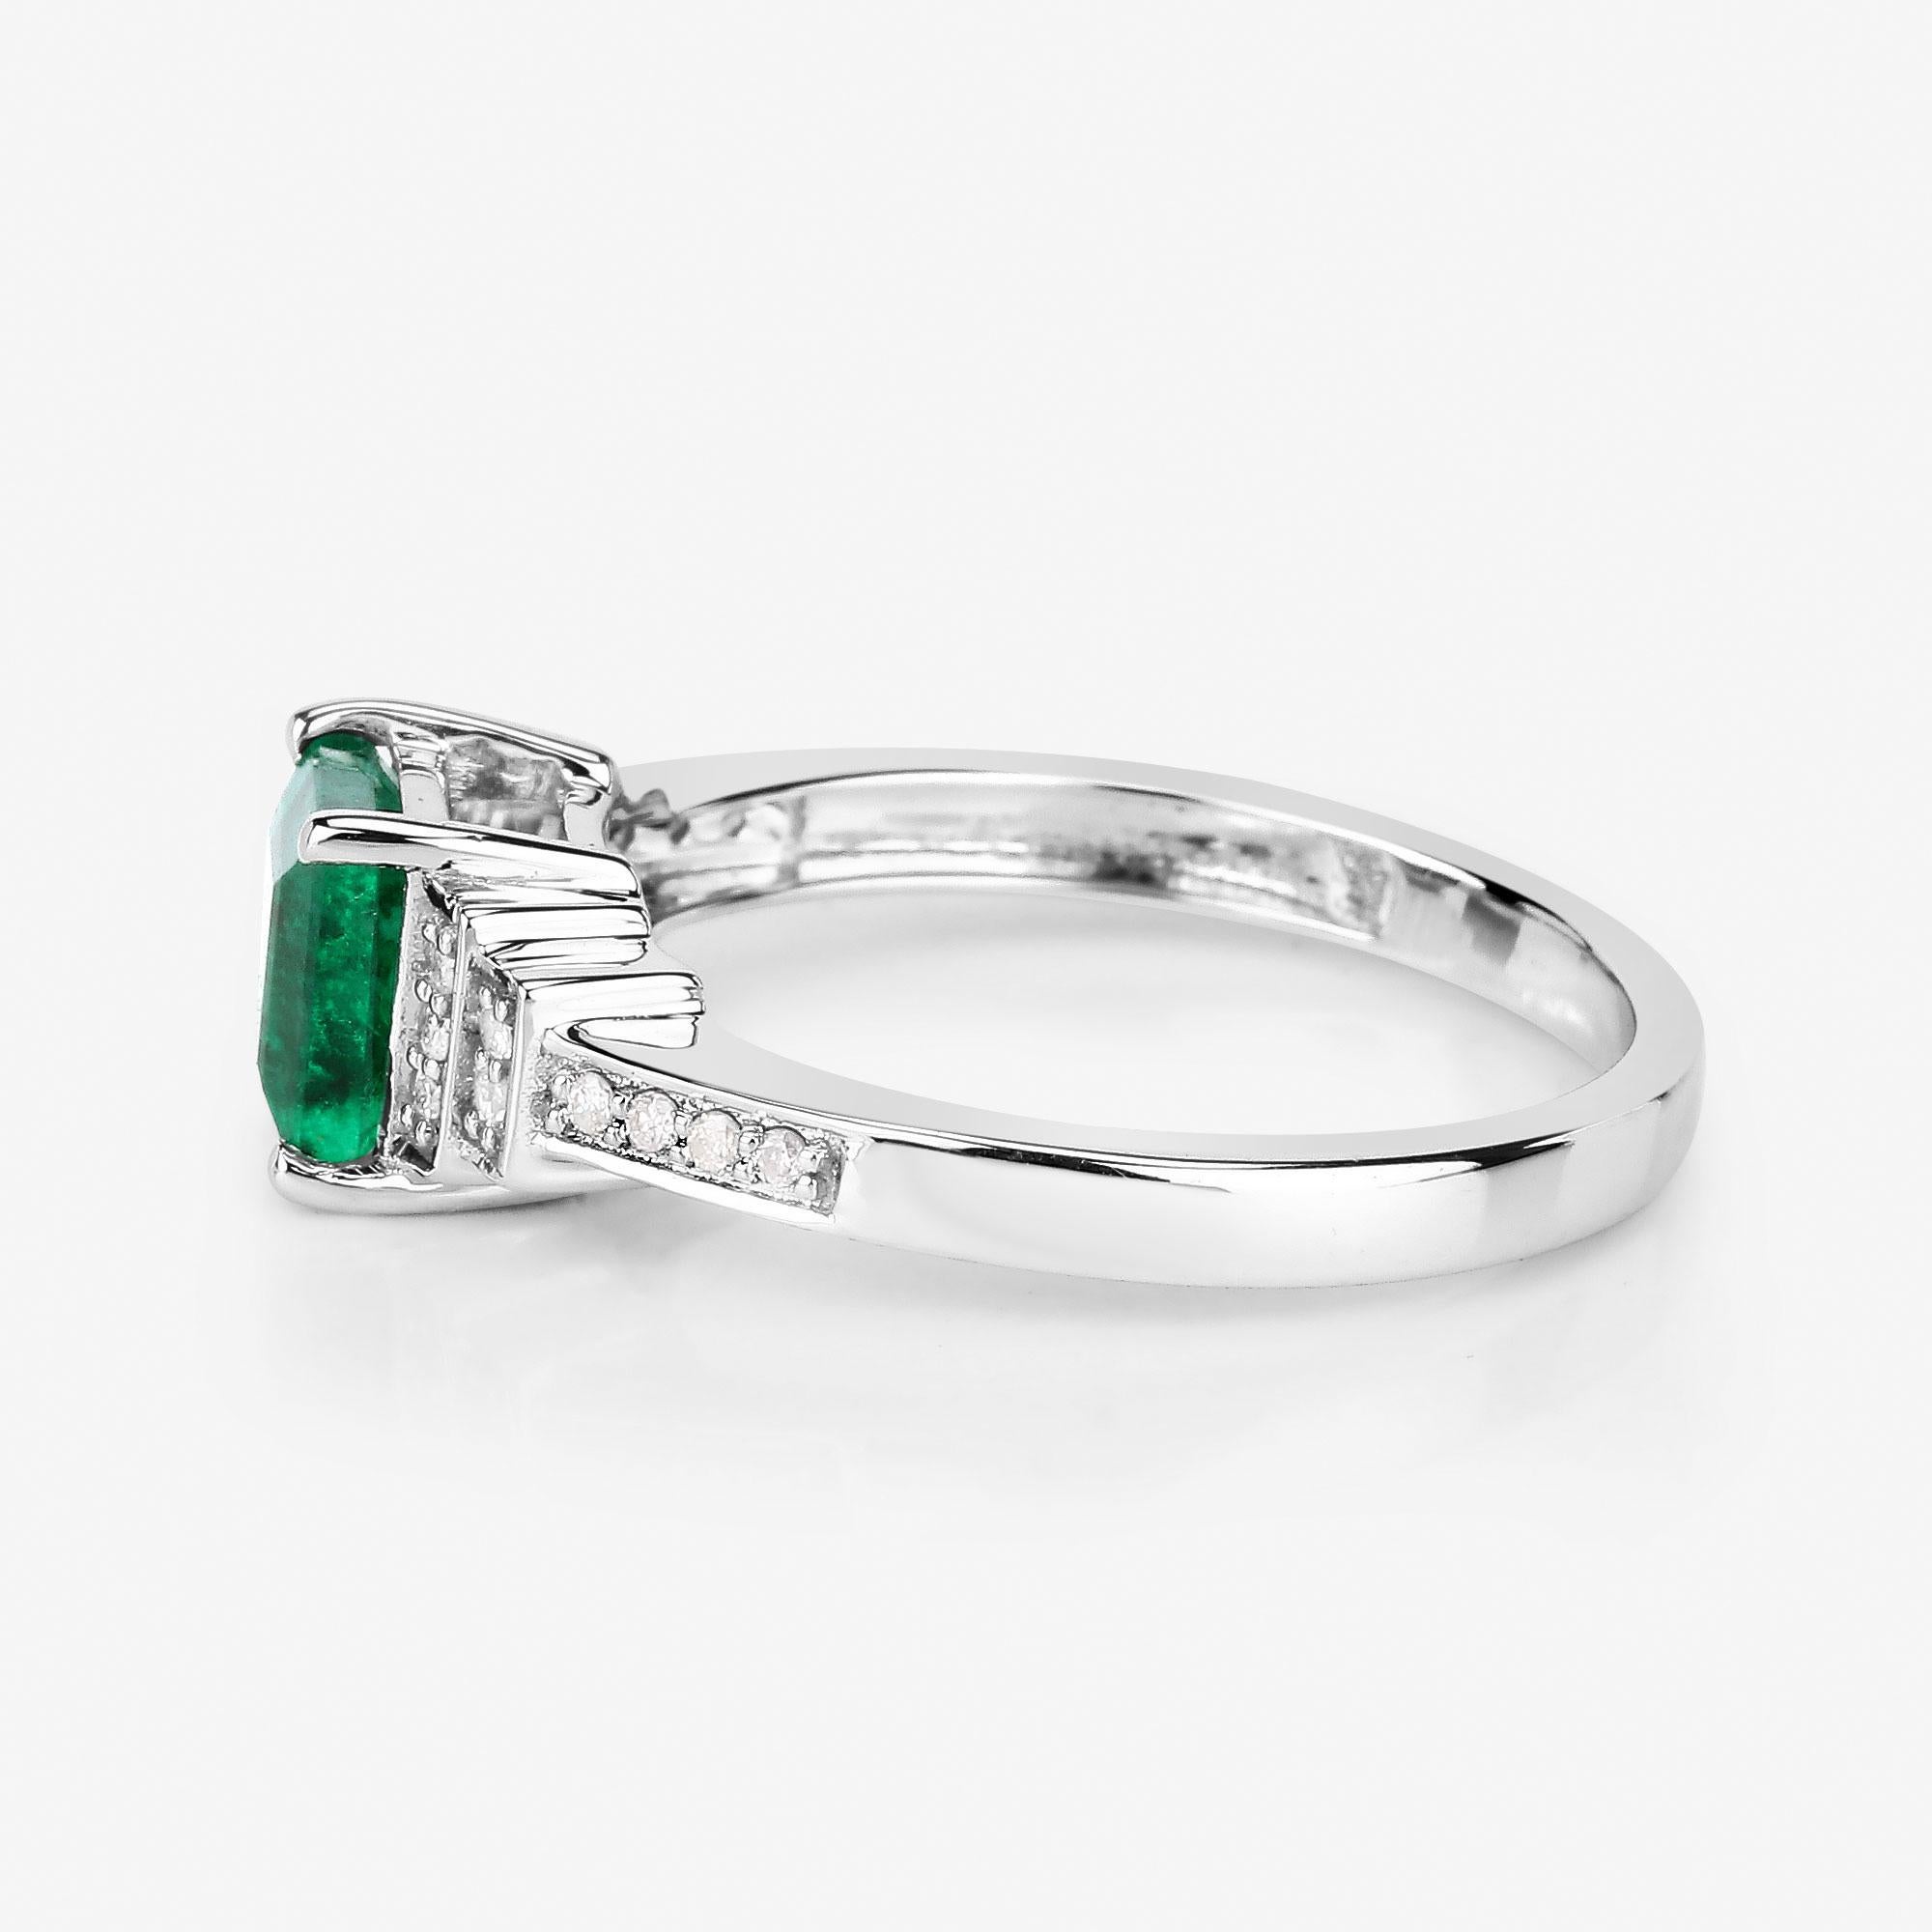 Natural Zambian Princess Cut Emerald Ring Diamond Setting 14K White Gold In New Condition For Sale In Laguna Niguel, CA